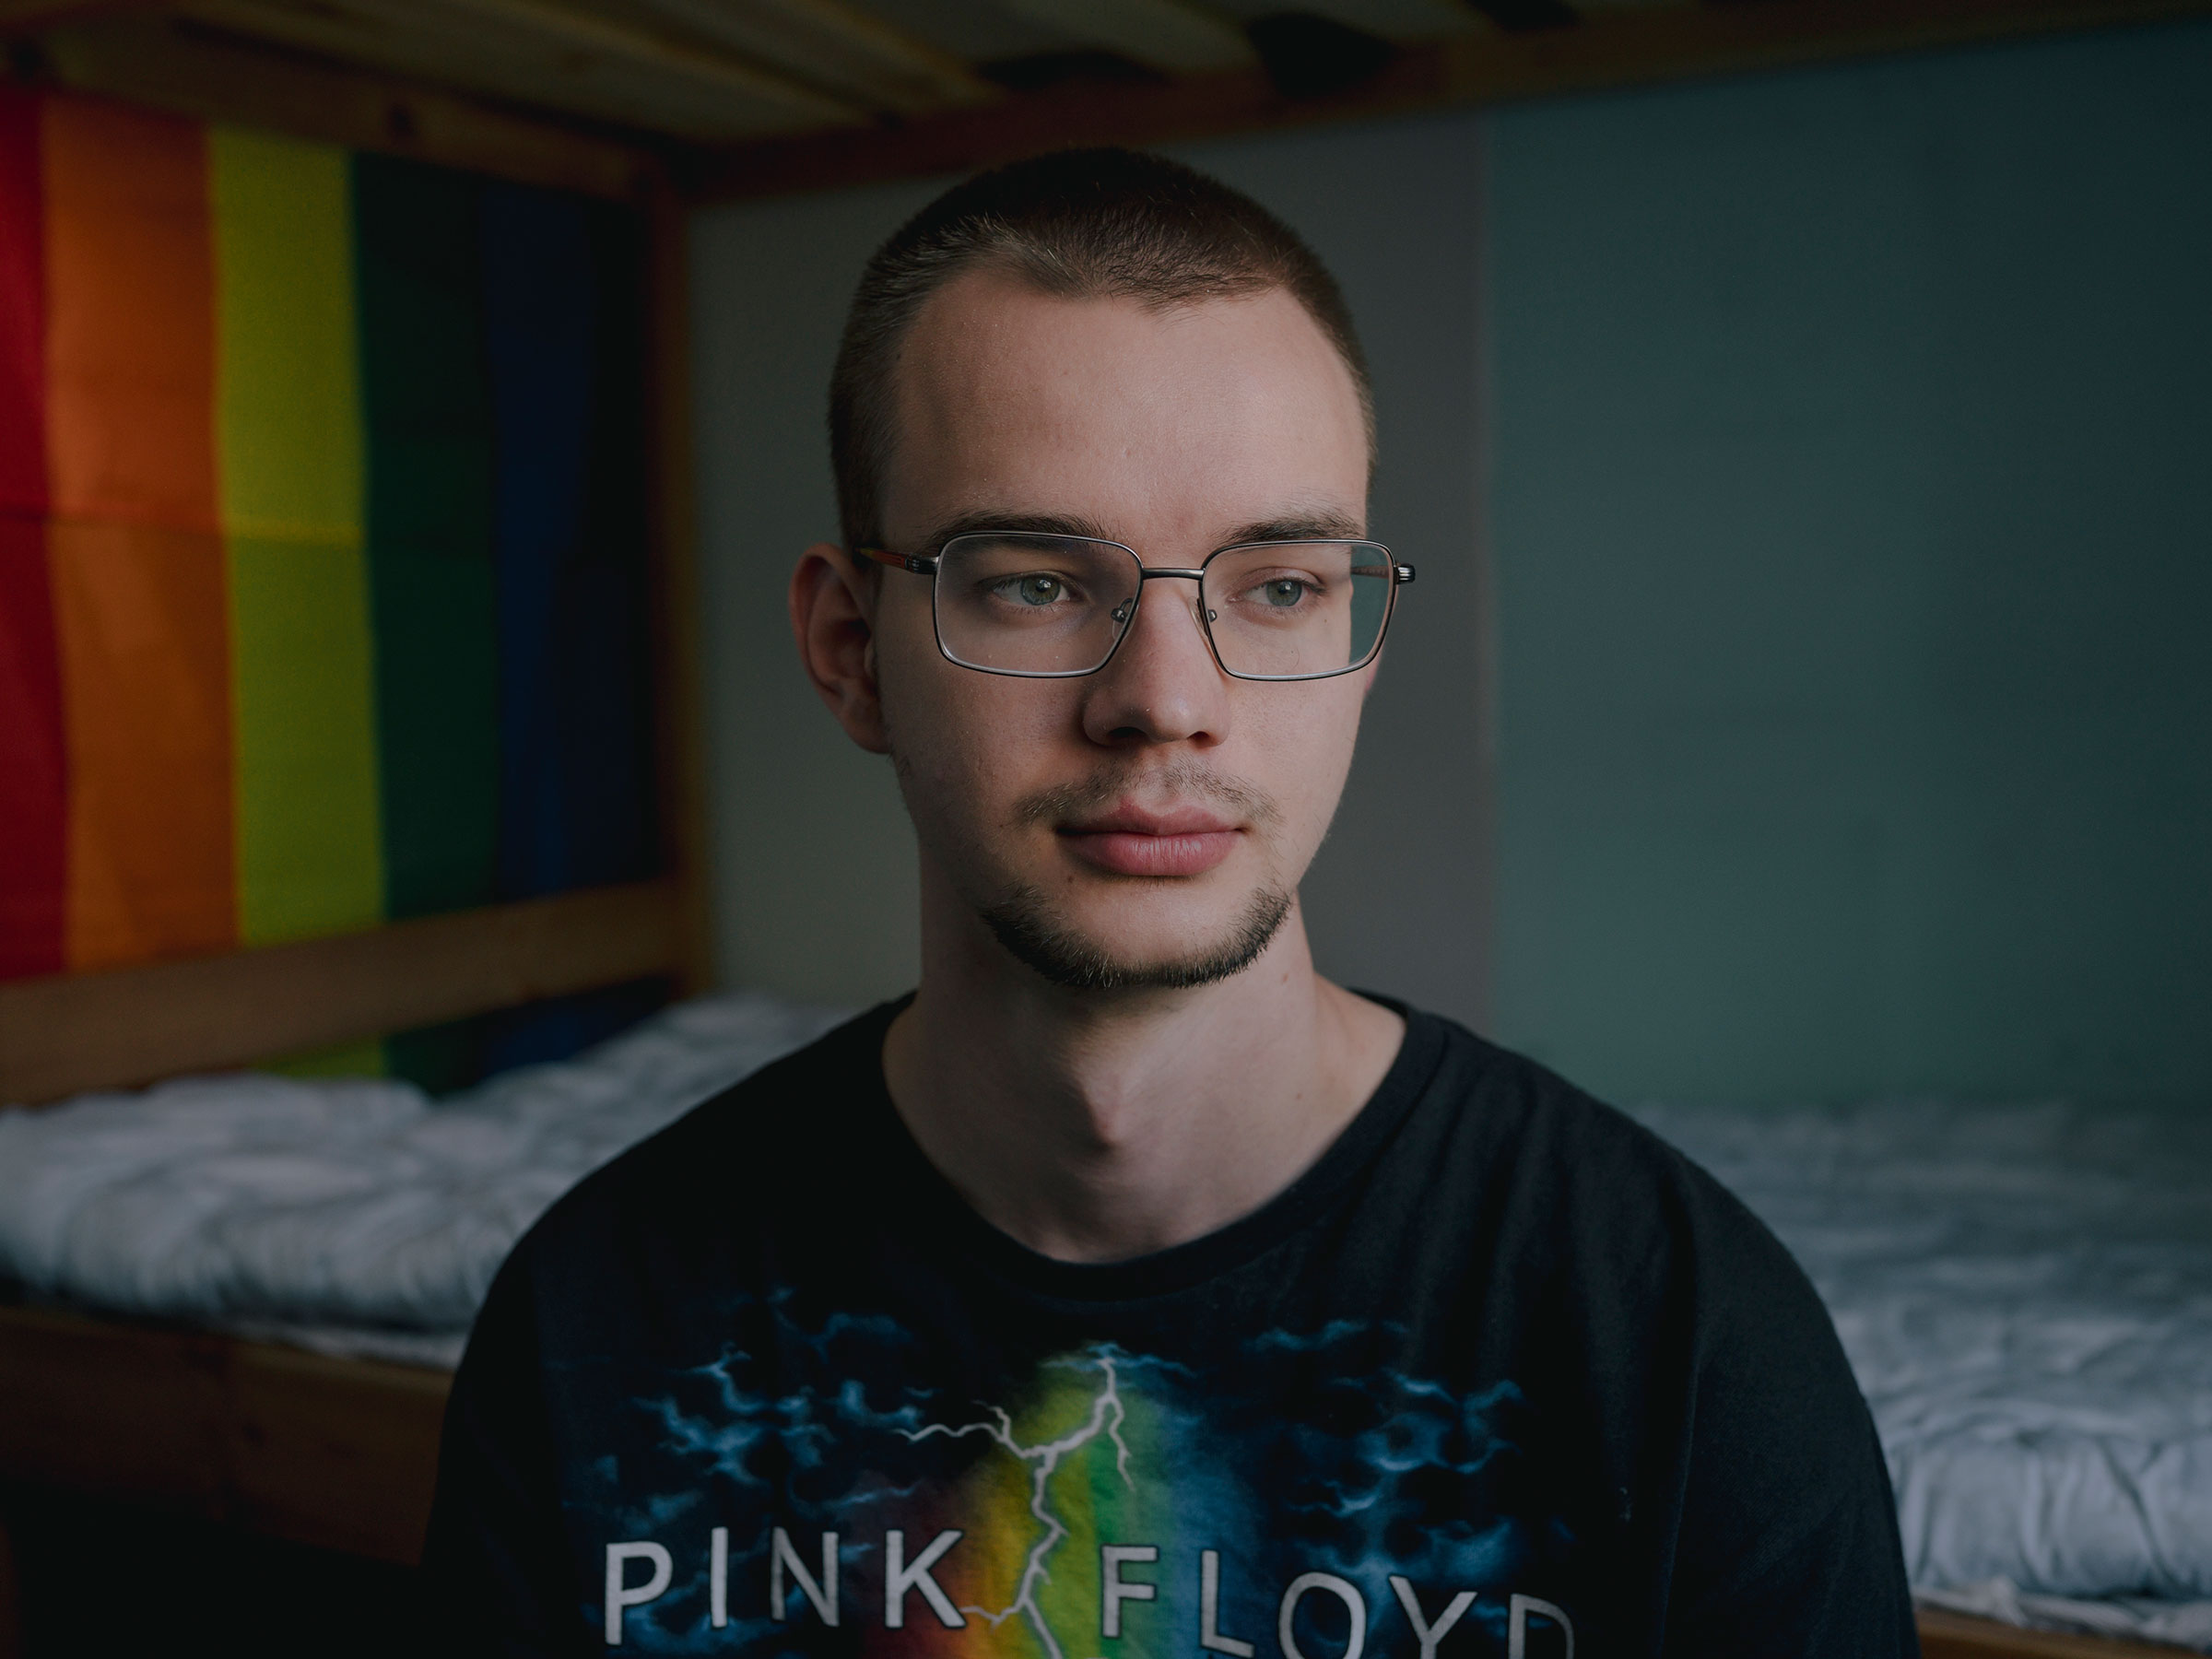 Sasha lived in the village of Dymer, north of Kyiv, with his family under Russian occupation during the first weeks of the war. He now lives in a shared apartment in Kyiv. (Fabian Ritter—DOCKS Collective)